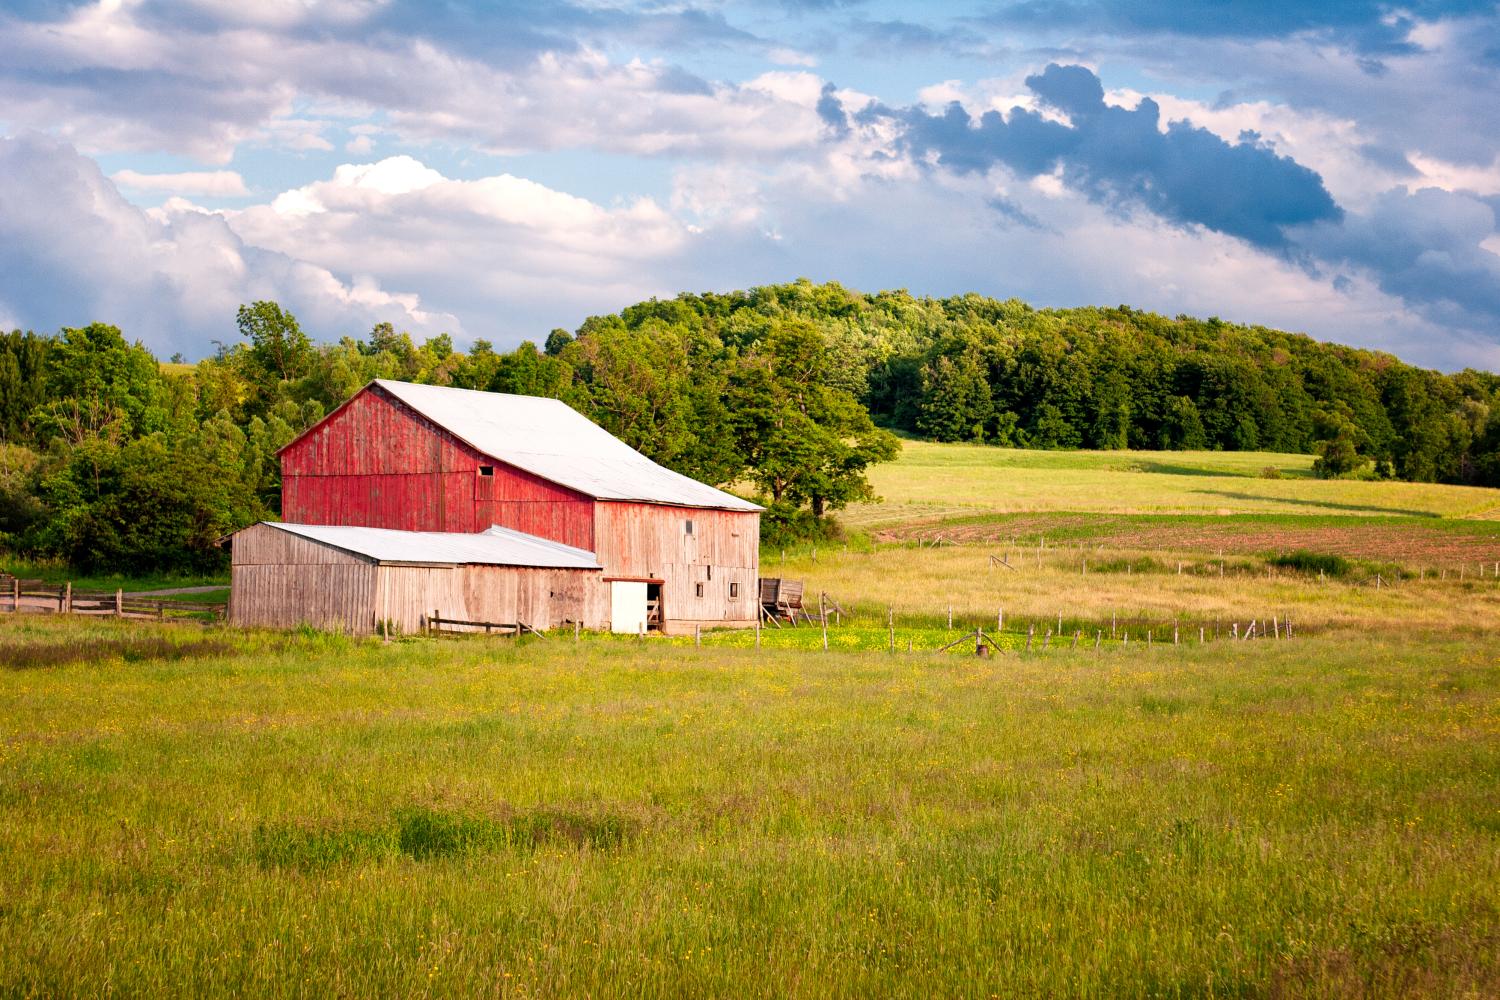 Photo of old, weathered barn on farm